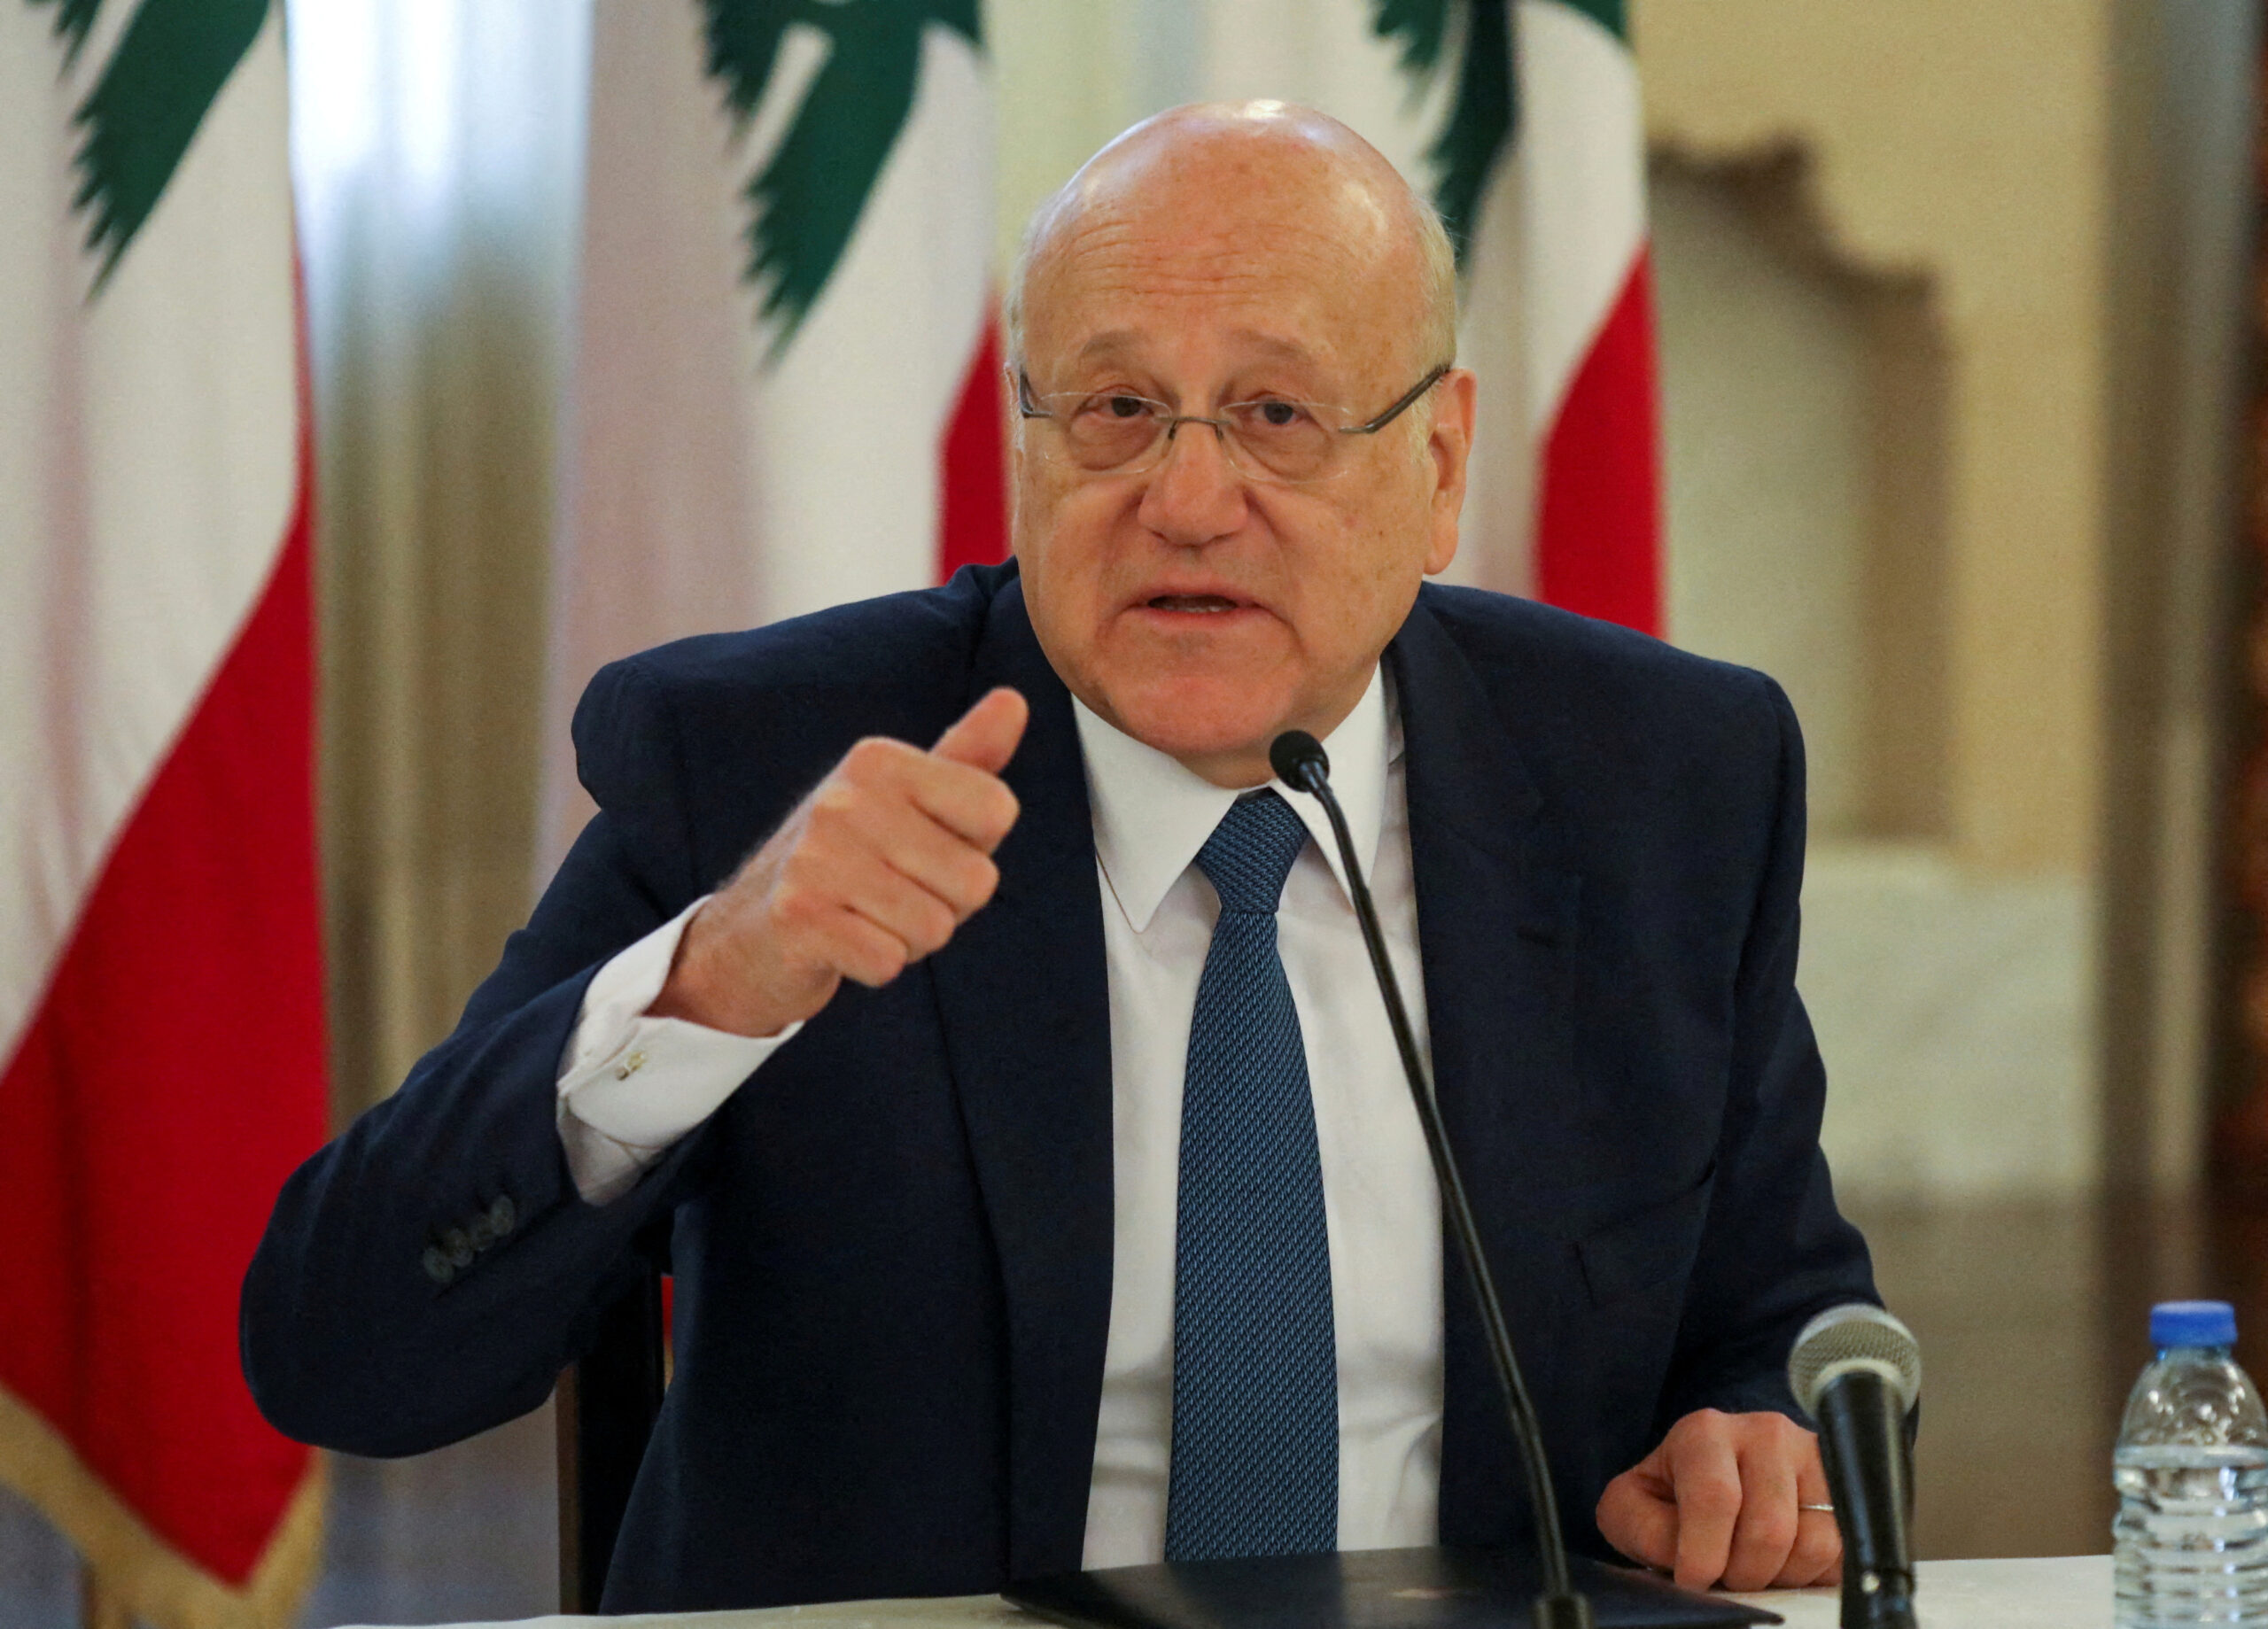 FILE PHOTO: Lebanese Prime Minister Najib Mikati gestures during a news conference on the latest developments in the country at the government palace in Beirut